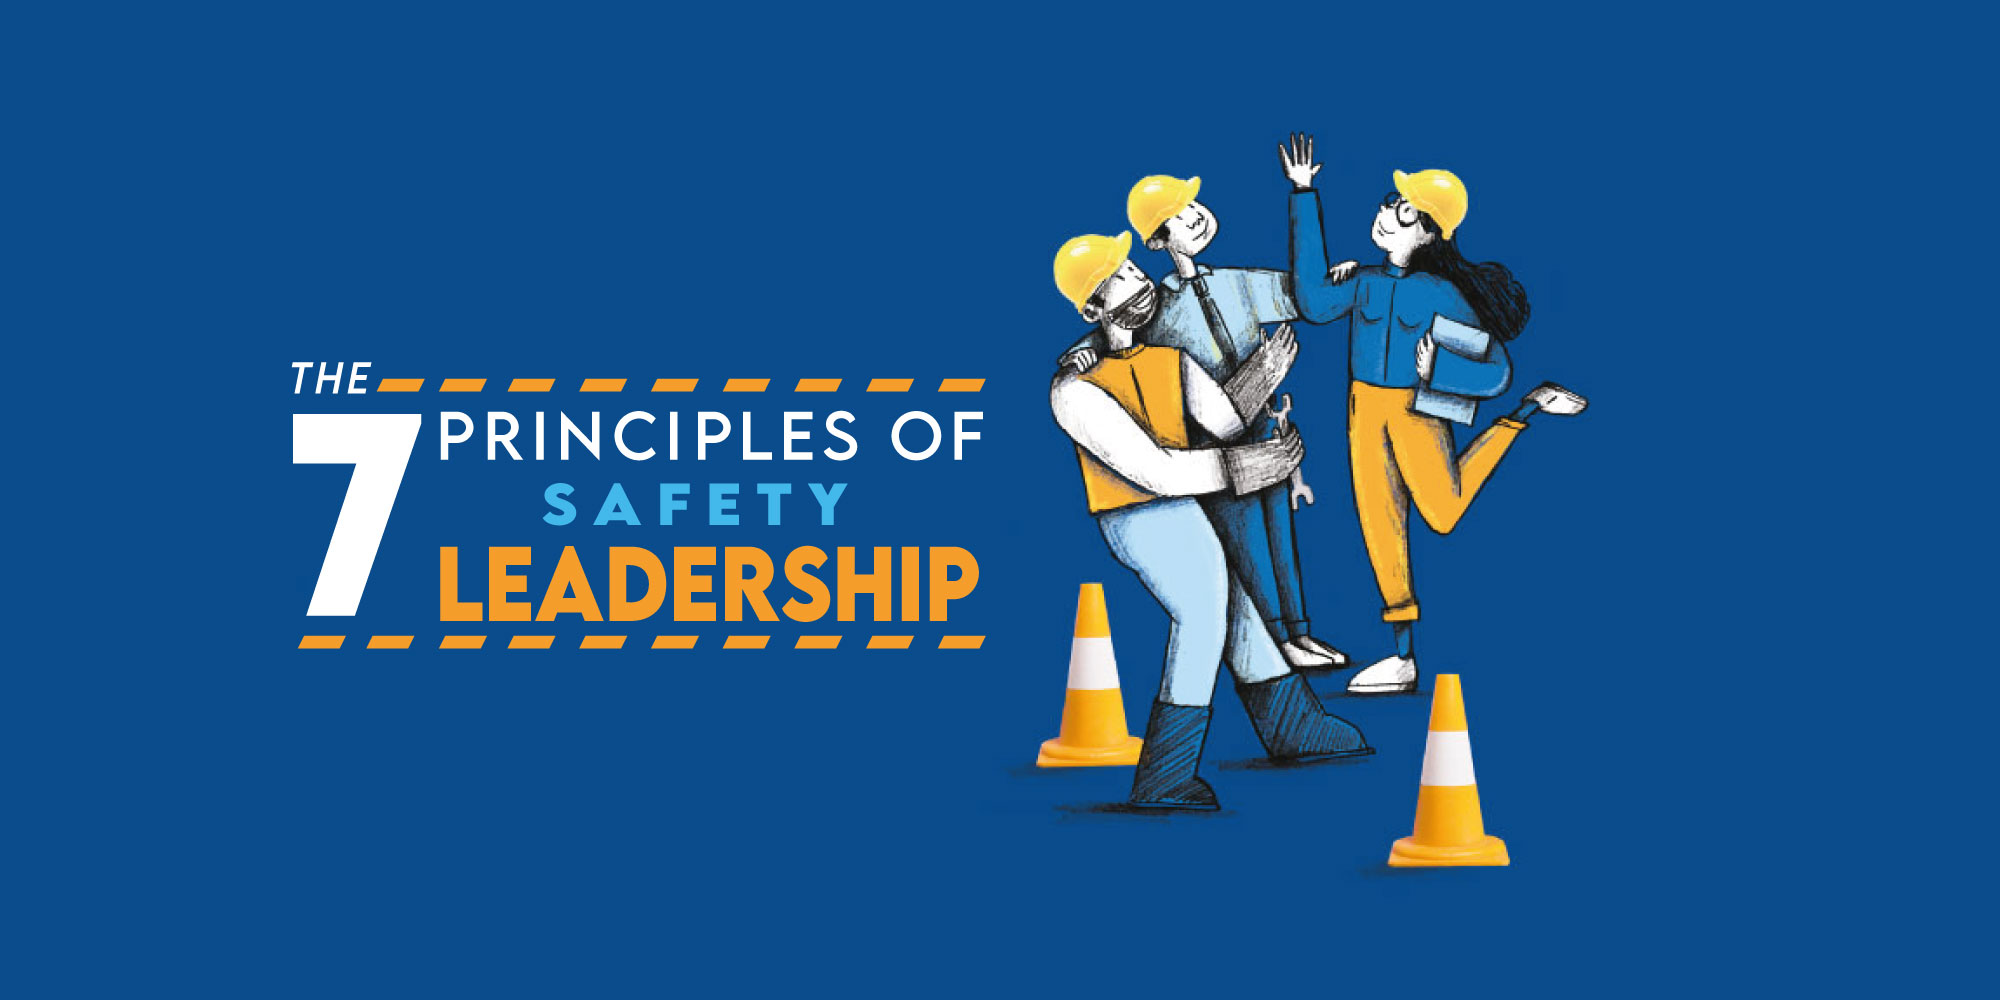 The 7 principles of safety leadership